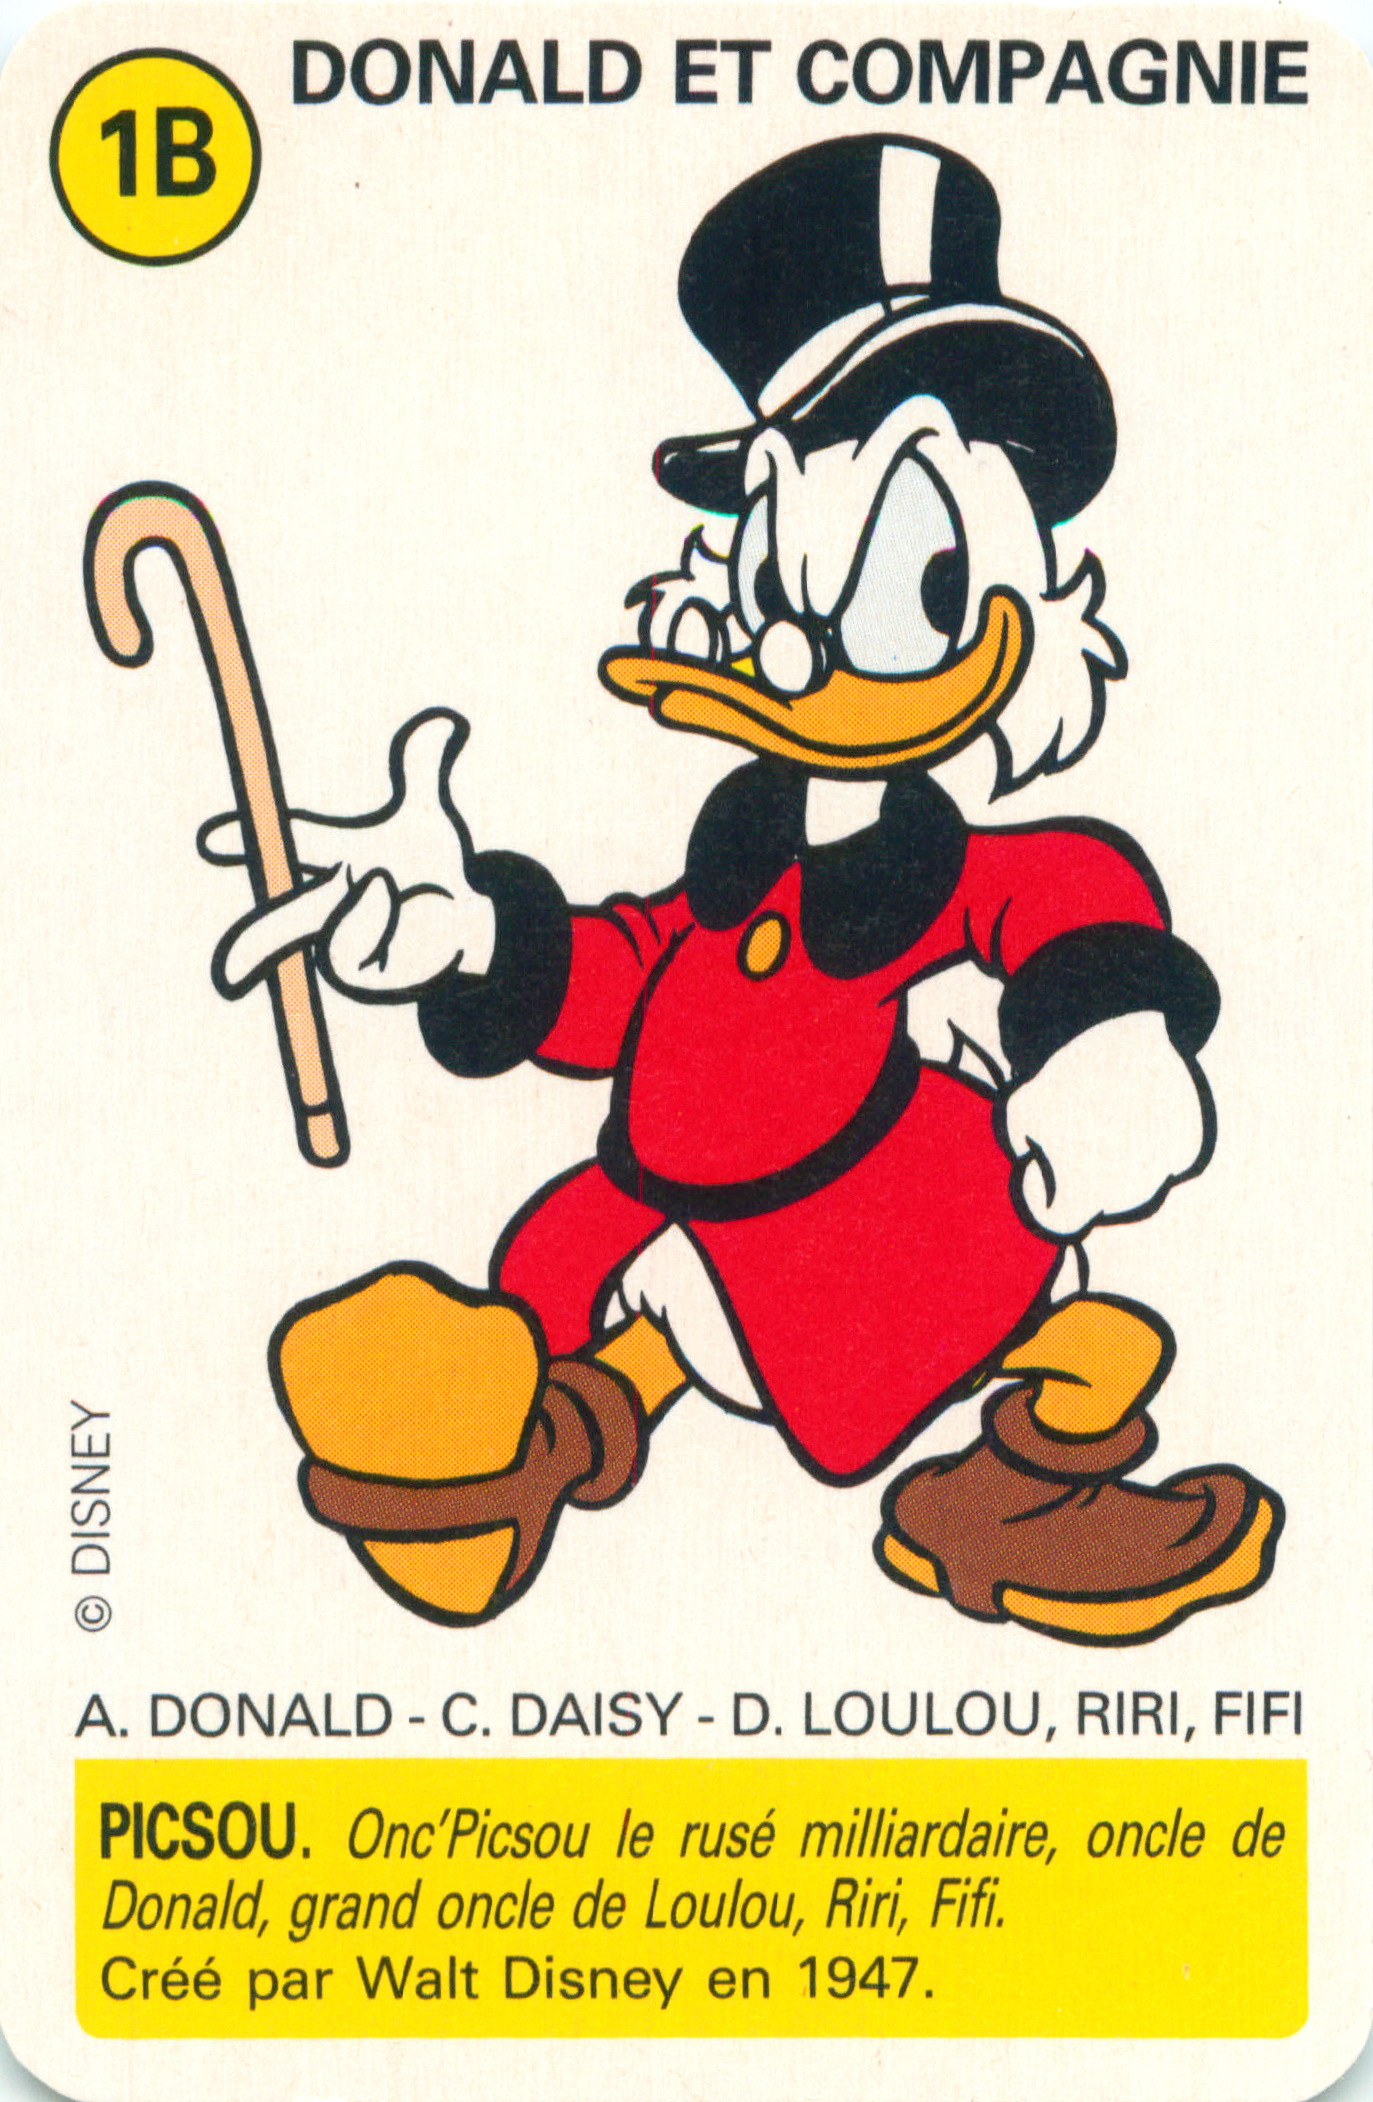 this card features a donald mouse holding a baseball bat